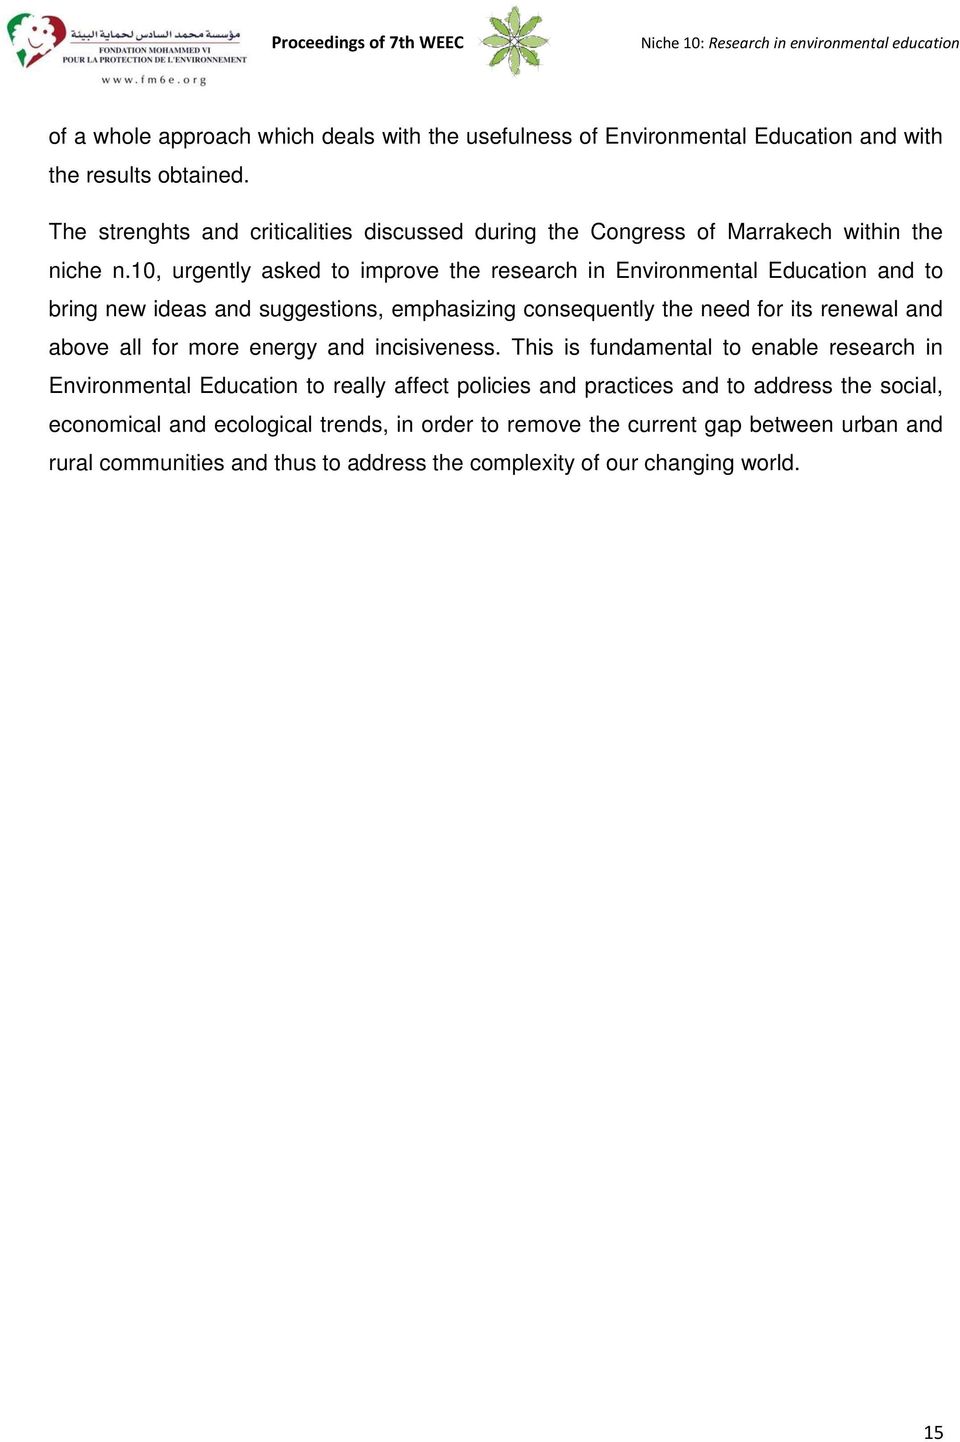 10, urgently asked to improve the research in Environmental Education and to bring new ideas and suggestions, emphasizing consequently the need for its renewal and above all for more energy and